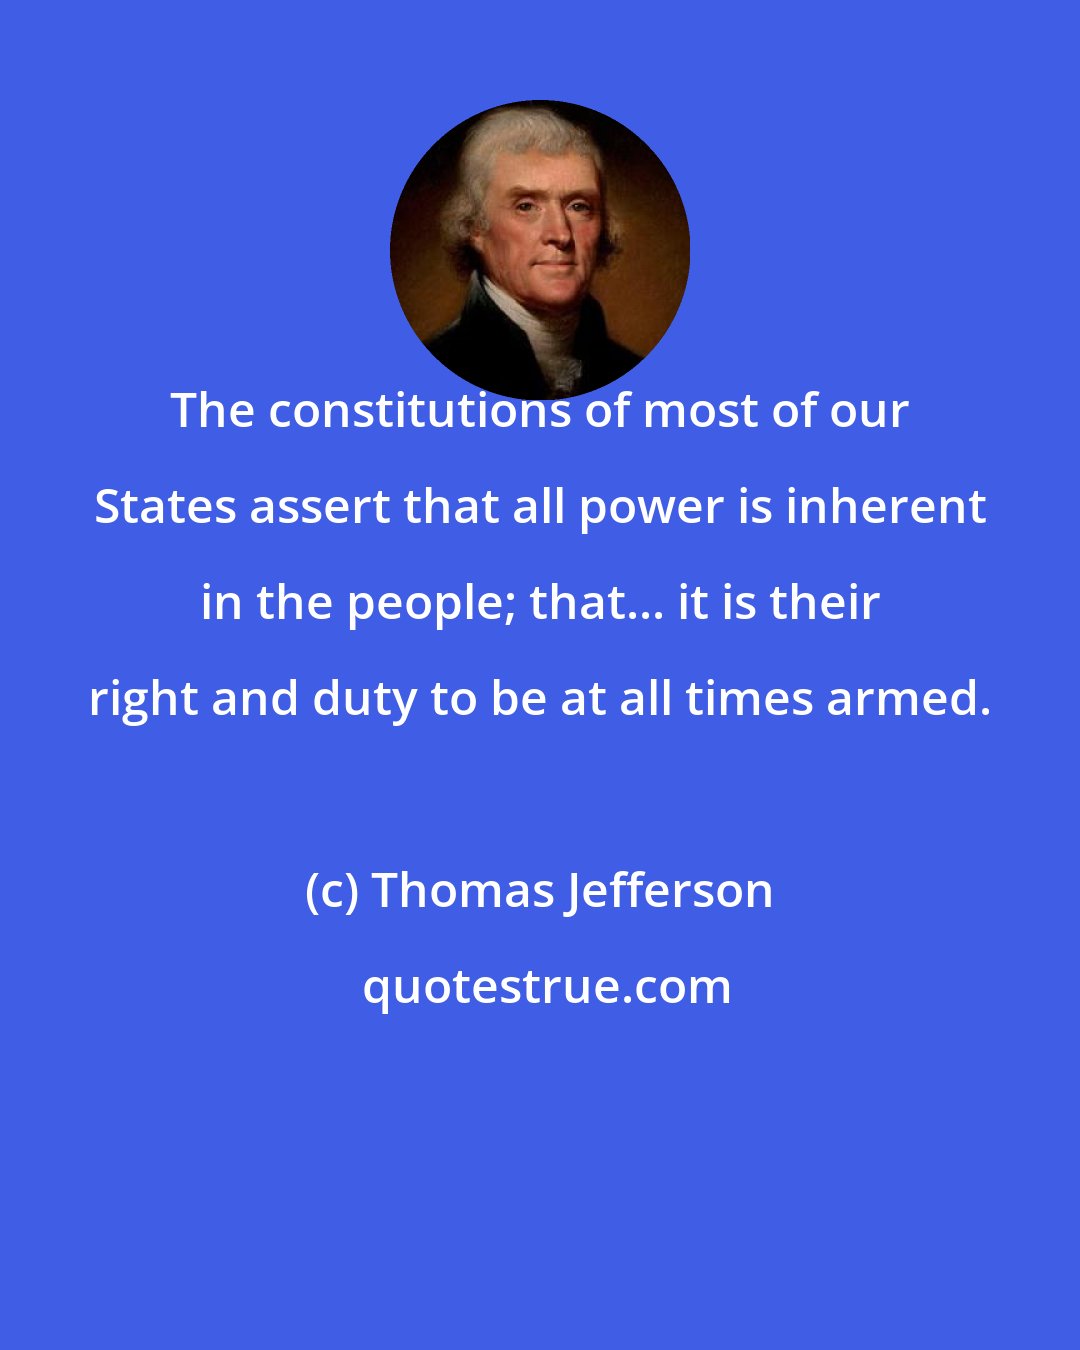 Thomas Jefferson: The constitutions of most of our States assert that all power is inherent in the people; that... it is their right and duty to be at all times armed.